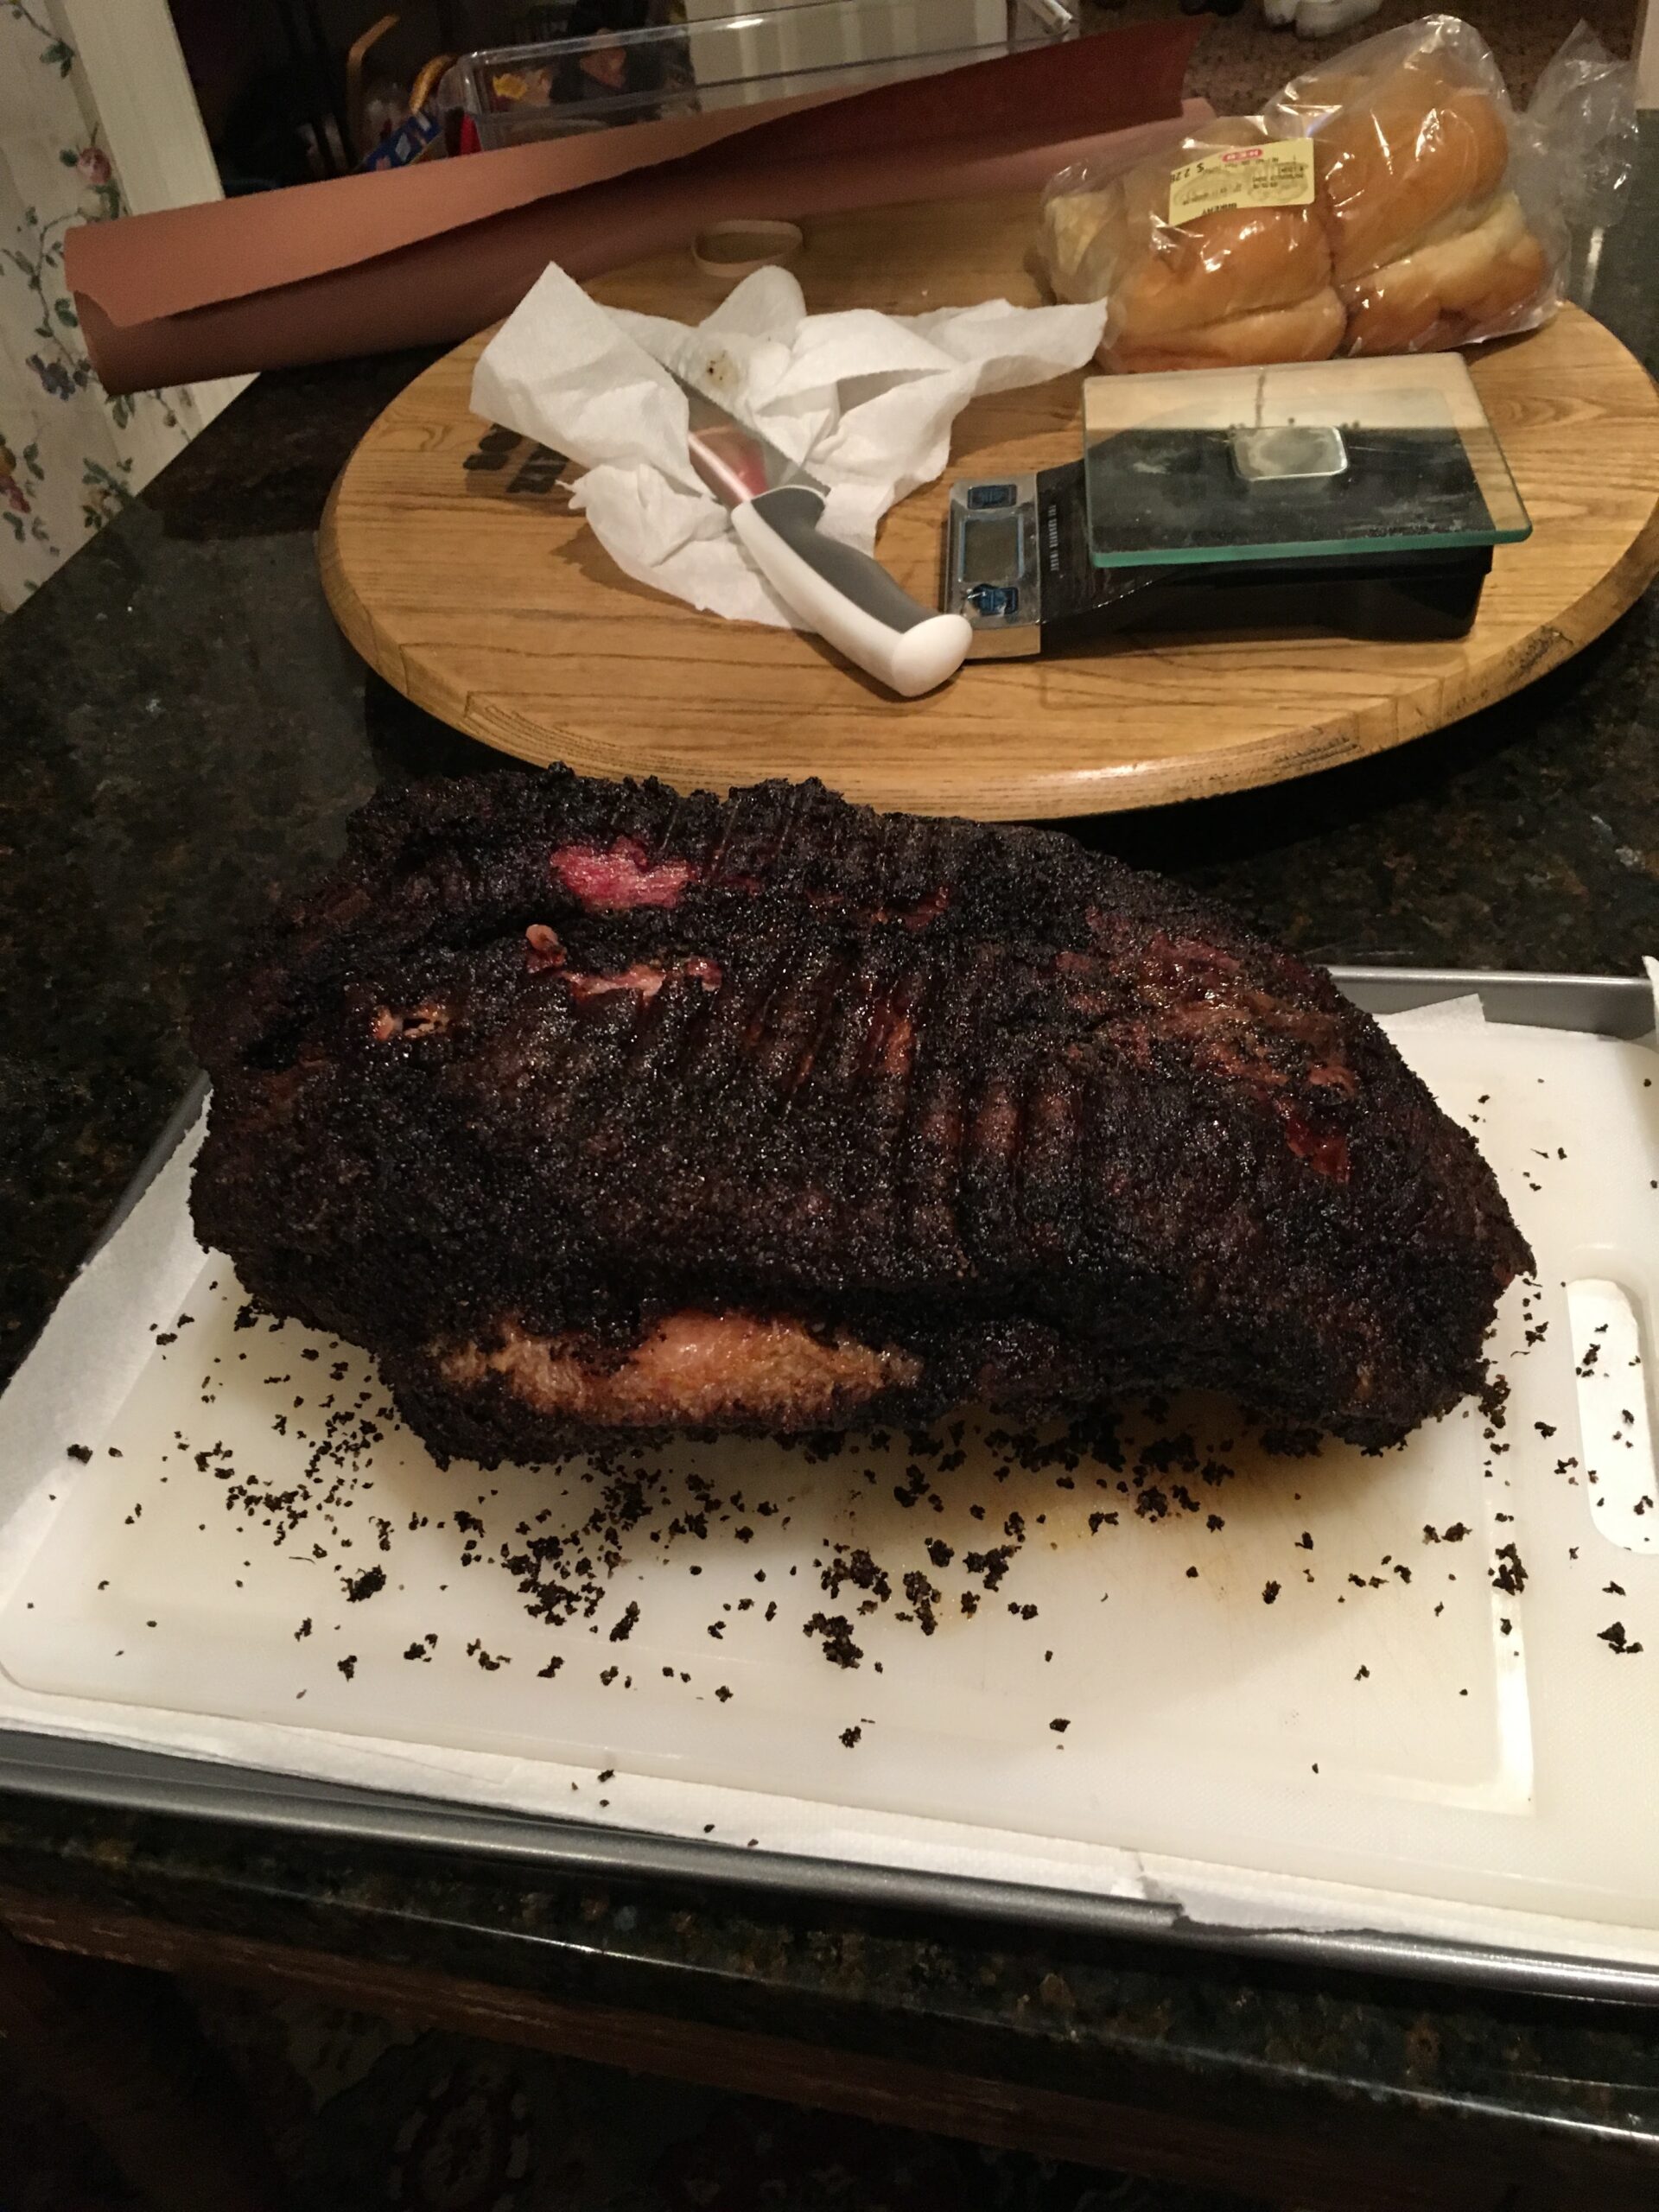 Can brisket rest too long? | BBQ DROPOUT’S TAKE